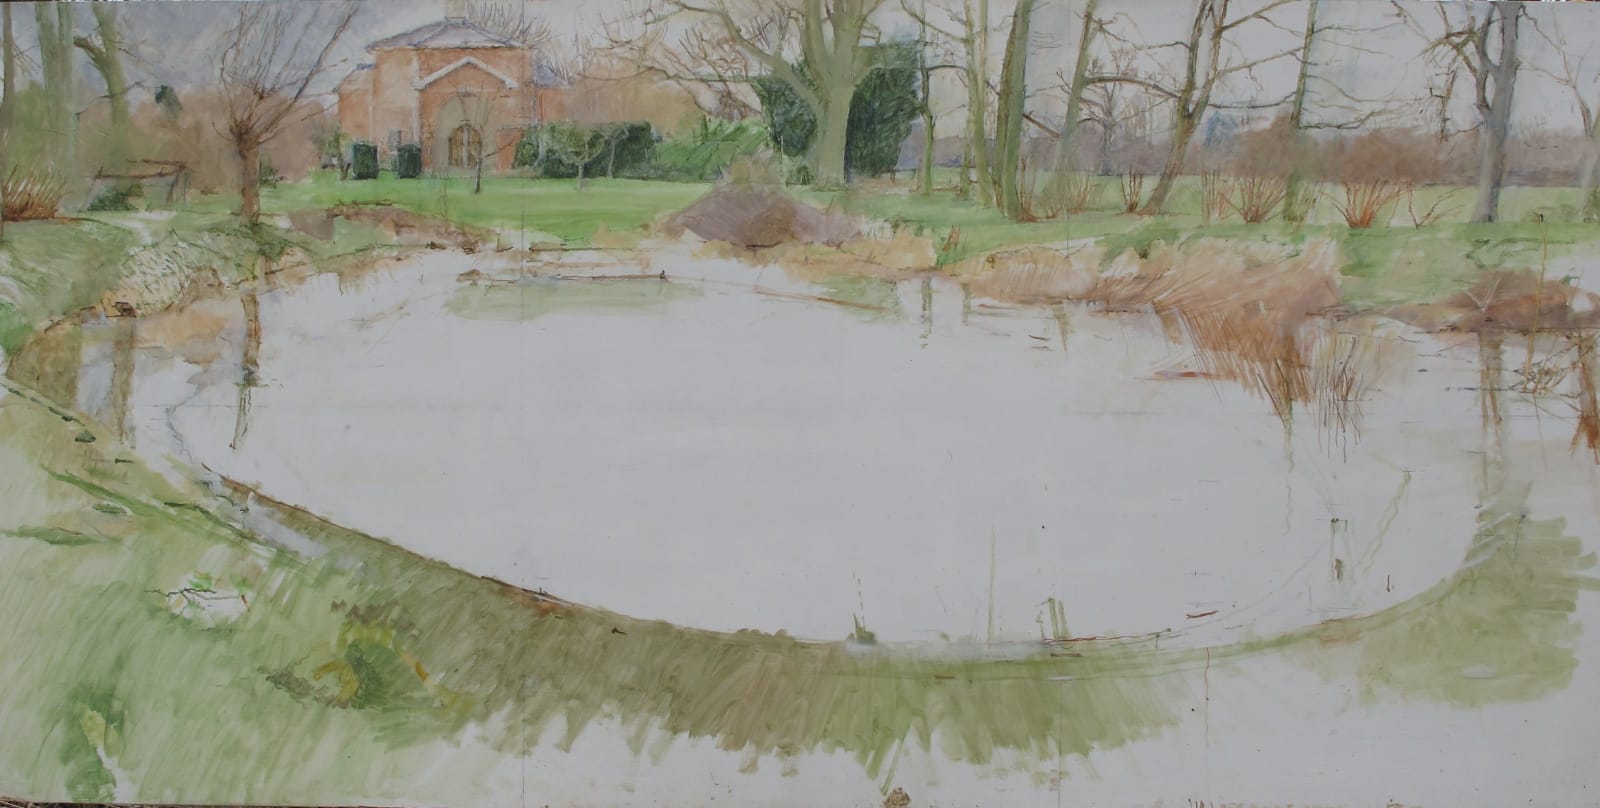 PATRICK GEORGE, The Pond and Grandfathers, 2006-2007